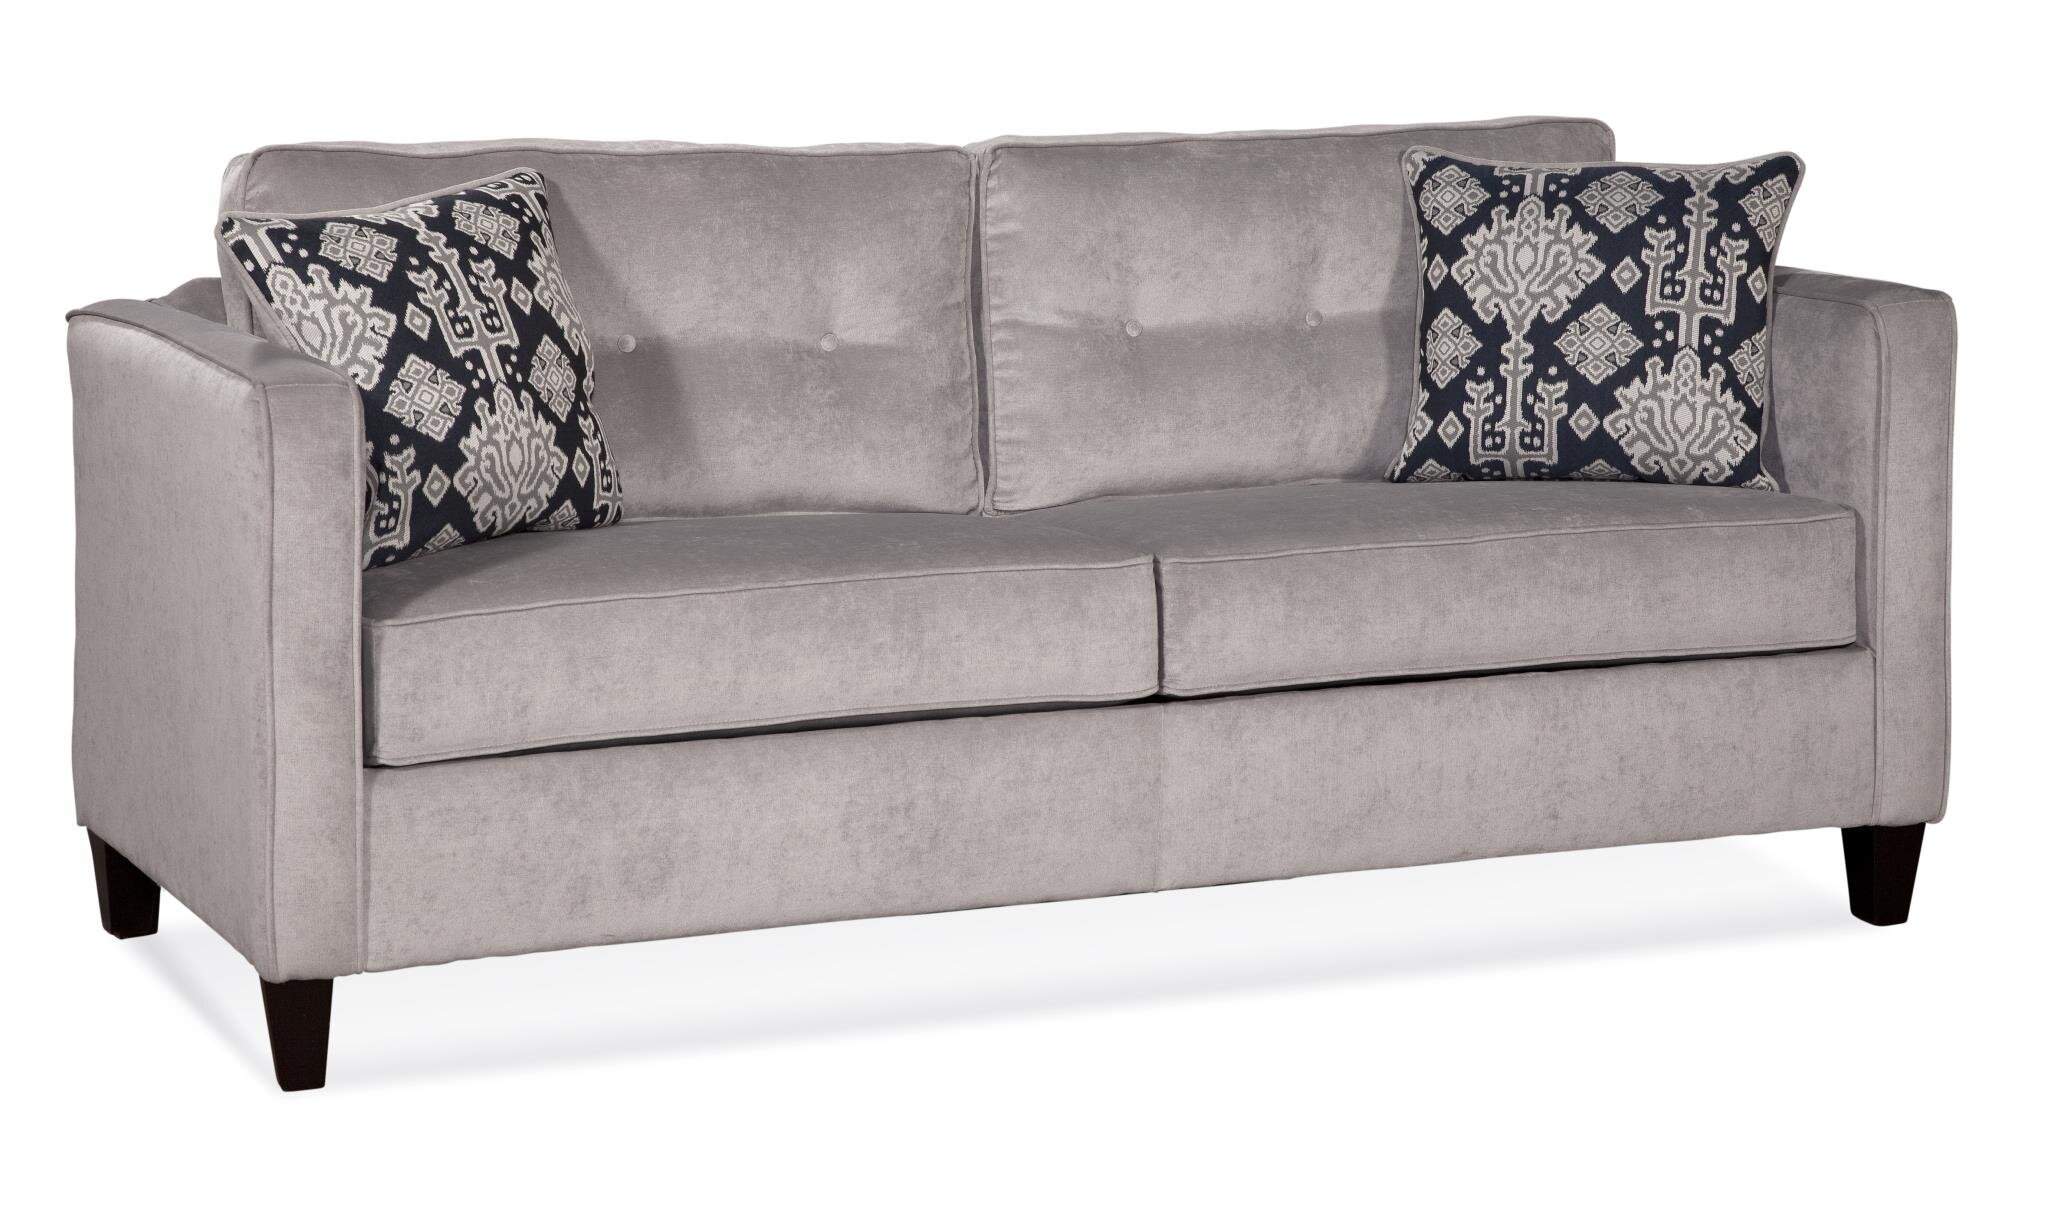 Tidworth 72” Square Arm Sofa Bed with Reversible Cushions